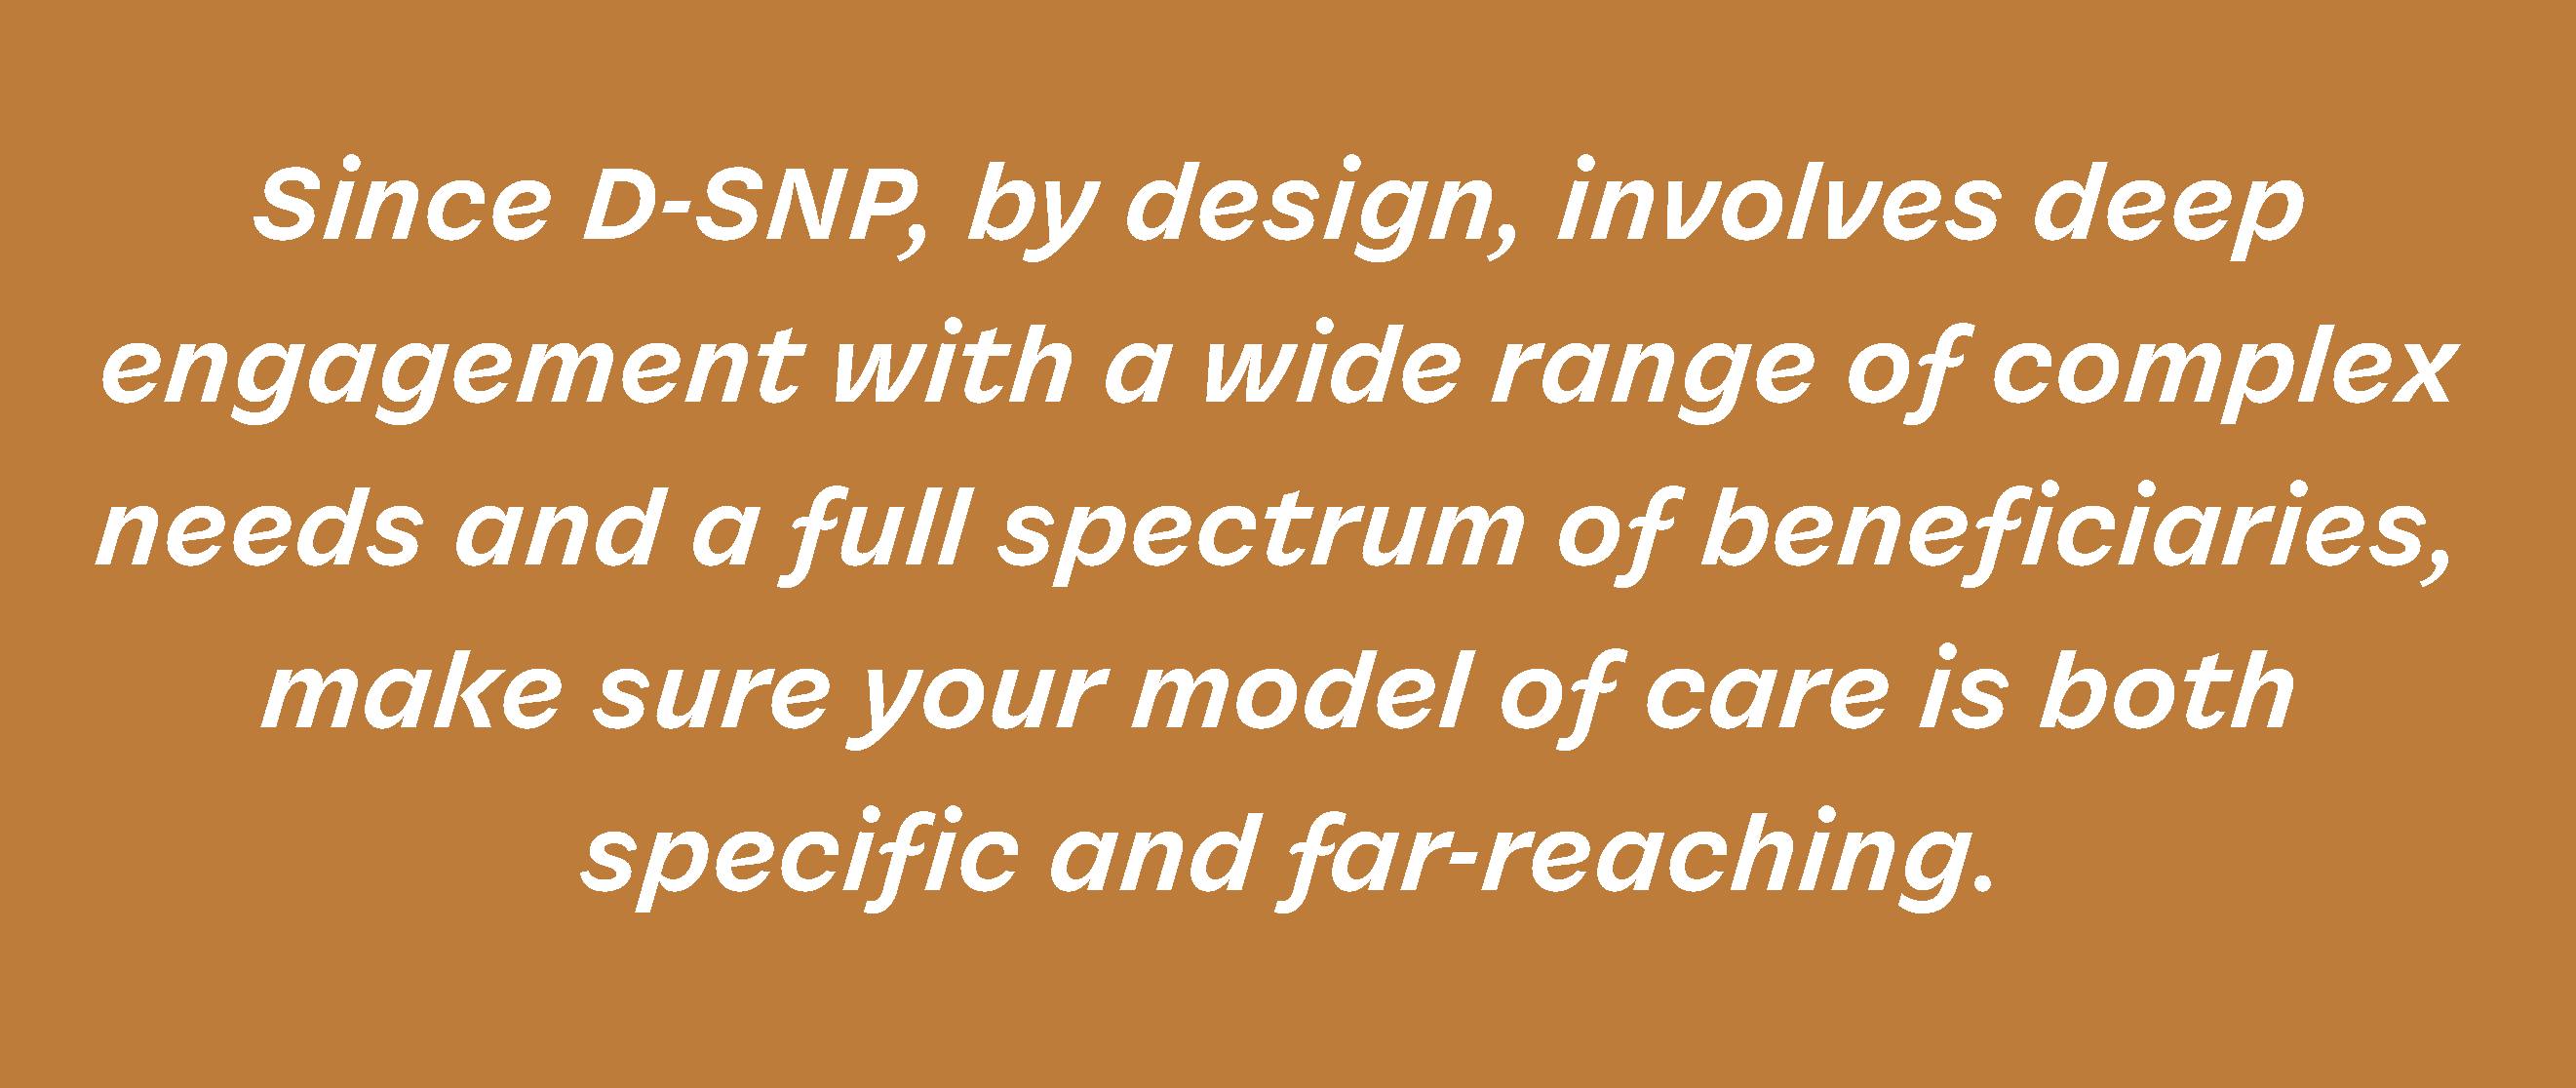 Since D-SNP, by design, involves deep engagement with a wide range of complex needs and a full spectrum of beneficiaries, make sure your model of care is both specific and far-reaching.